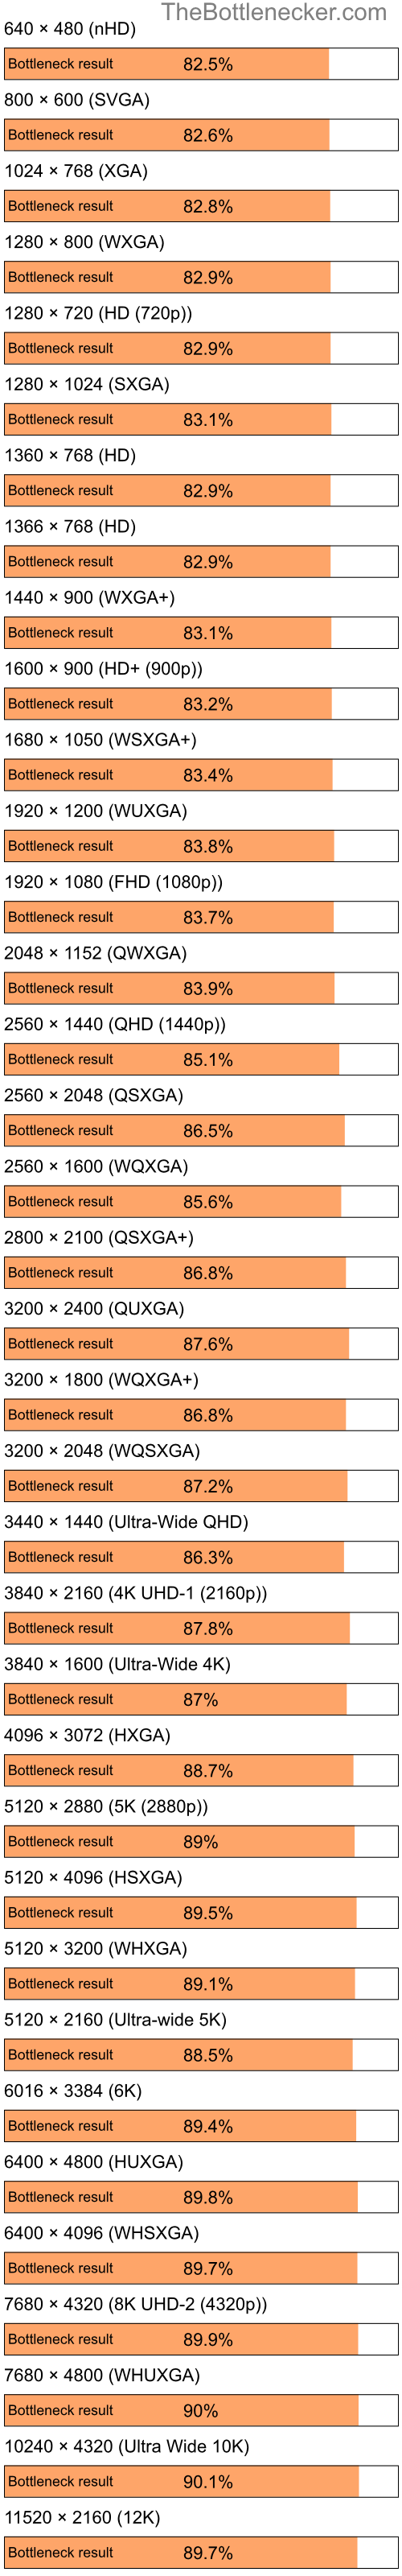 Bottleneck results by resolution for Intel Celeron M and NVIDIA GeForce 6200 LE in Graphic Card Intense Tasks